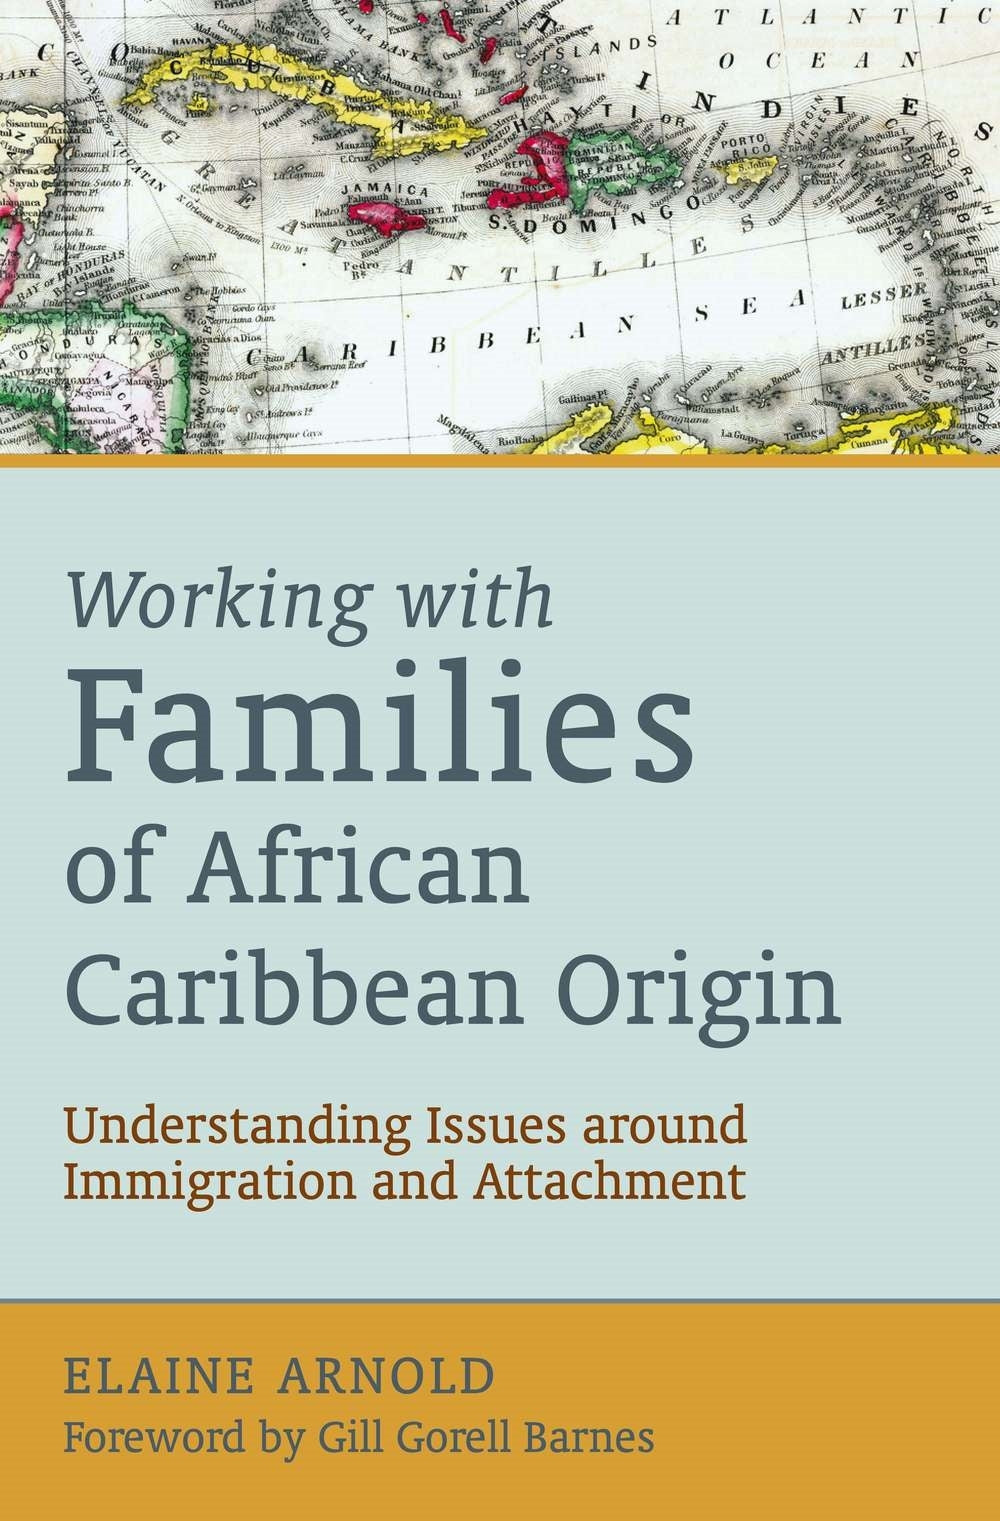 Working with Families of African Caribbean Origin by Elaine Arnold, Gill Gorell Barnes